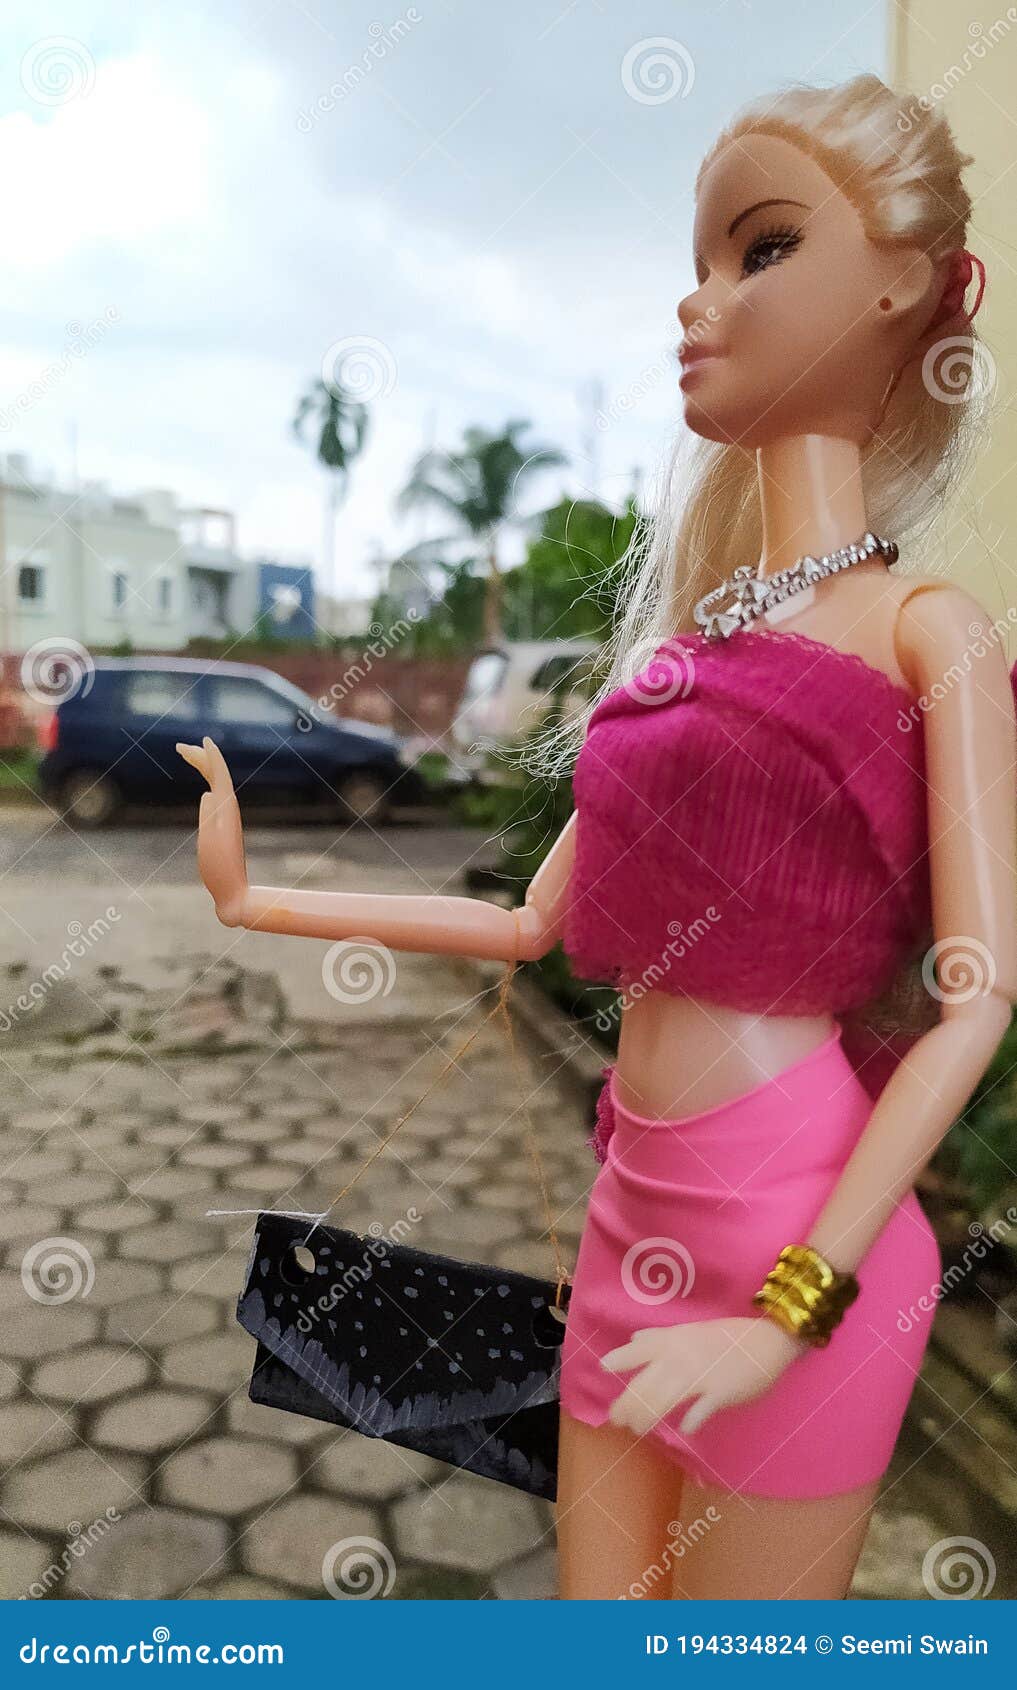 Kids Barbie Doll Wearing Pink Fashion Outfit Editorial Stock Image - Image  of model, wearing: 194334824